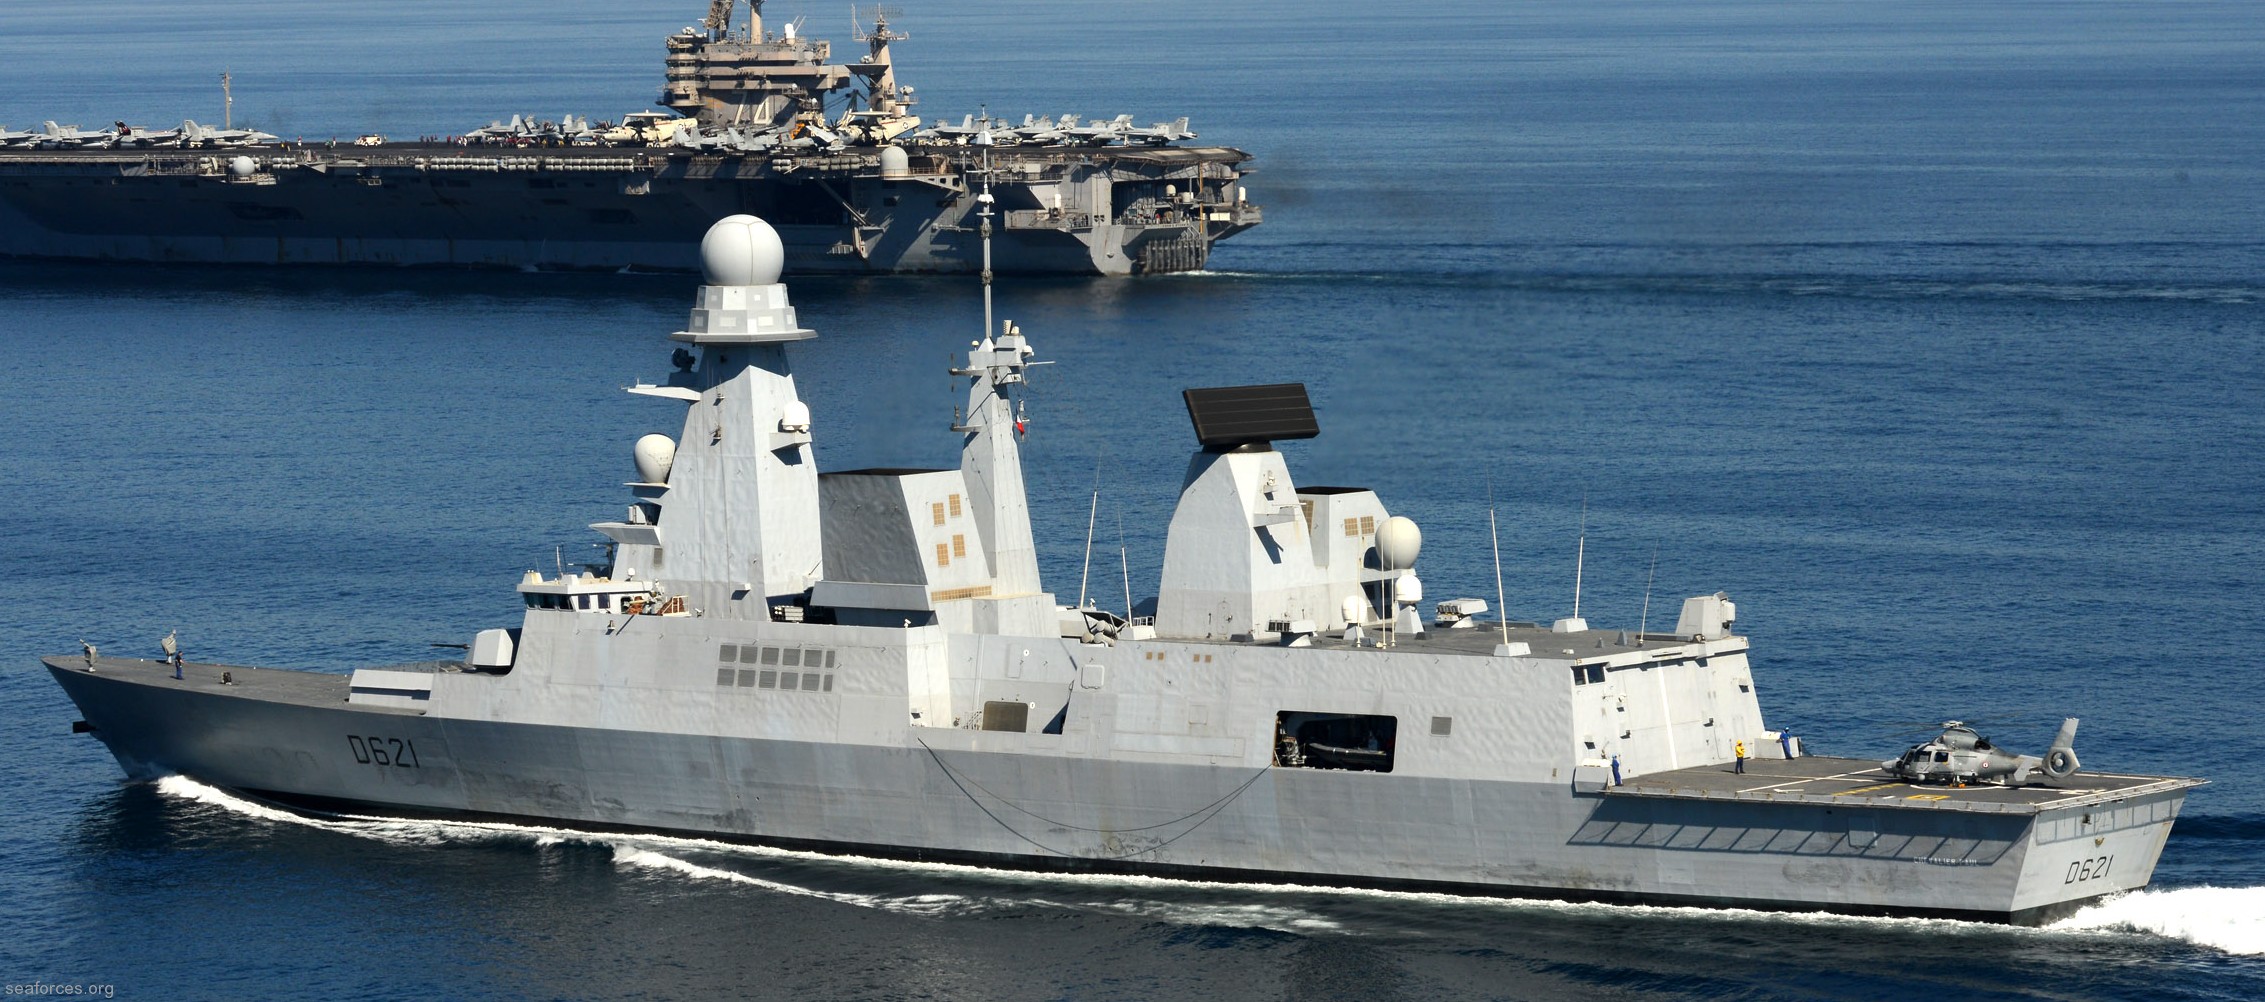 d-621 fs chevalier paul forbin horizon class guided missile frigate anti-air-warfare aaw ffgh french navy marine nationale 04